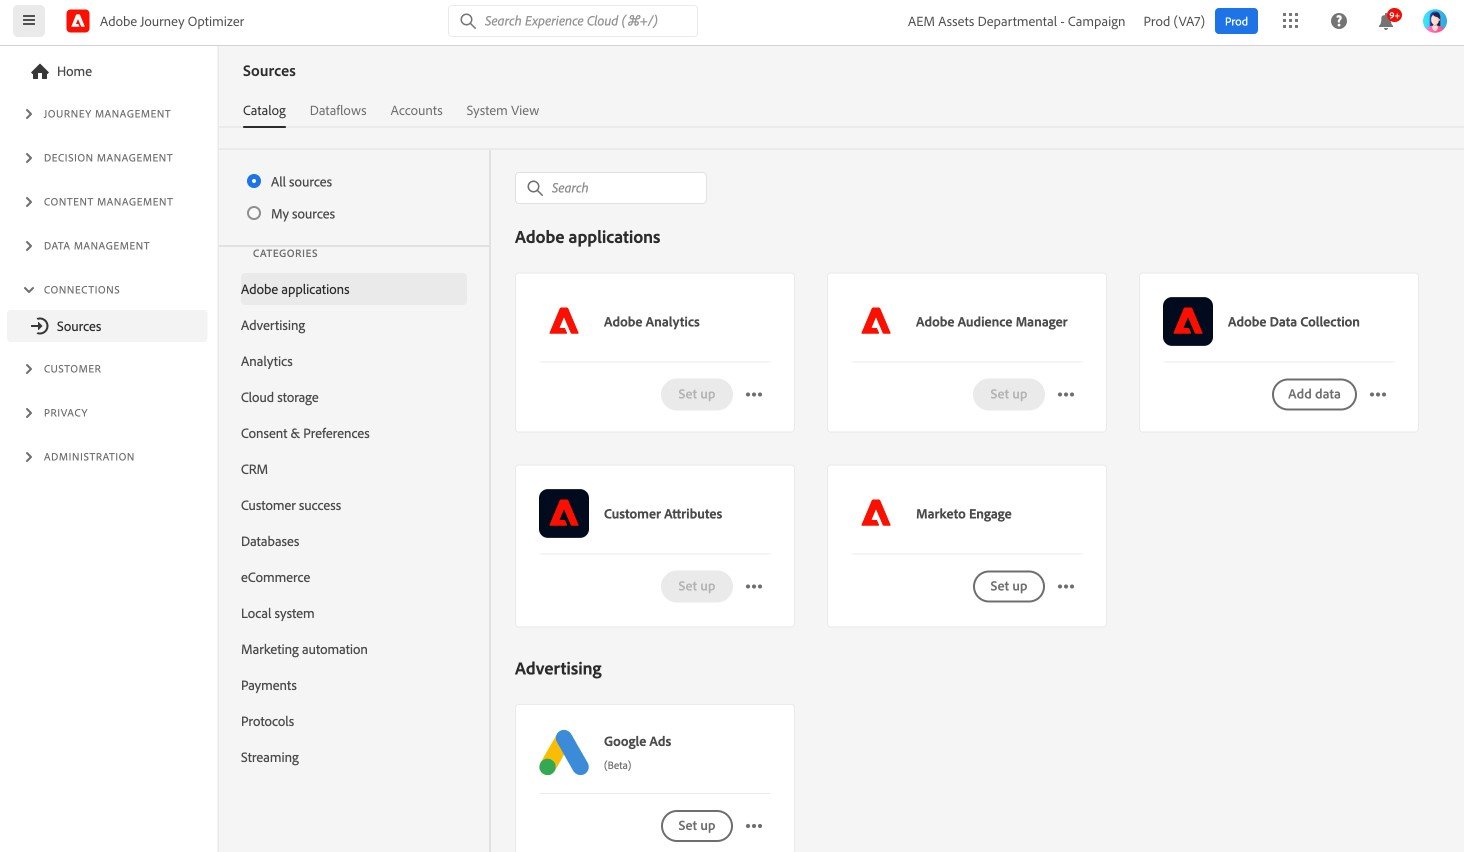 Adobe Journey Optimizer interface: connections -> sources